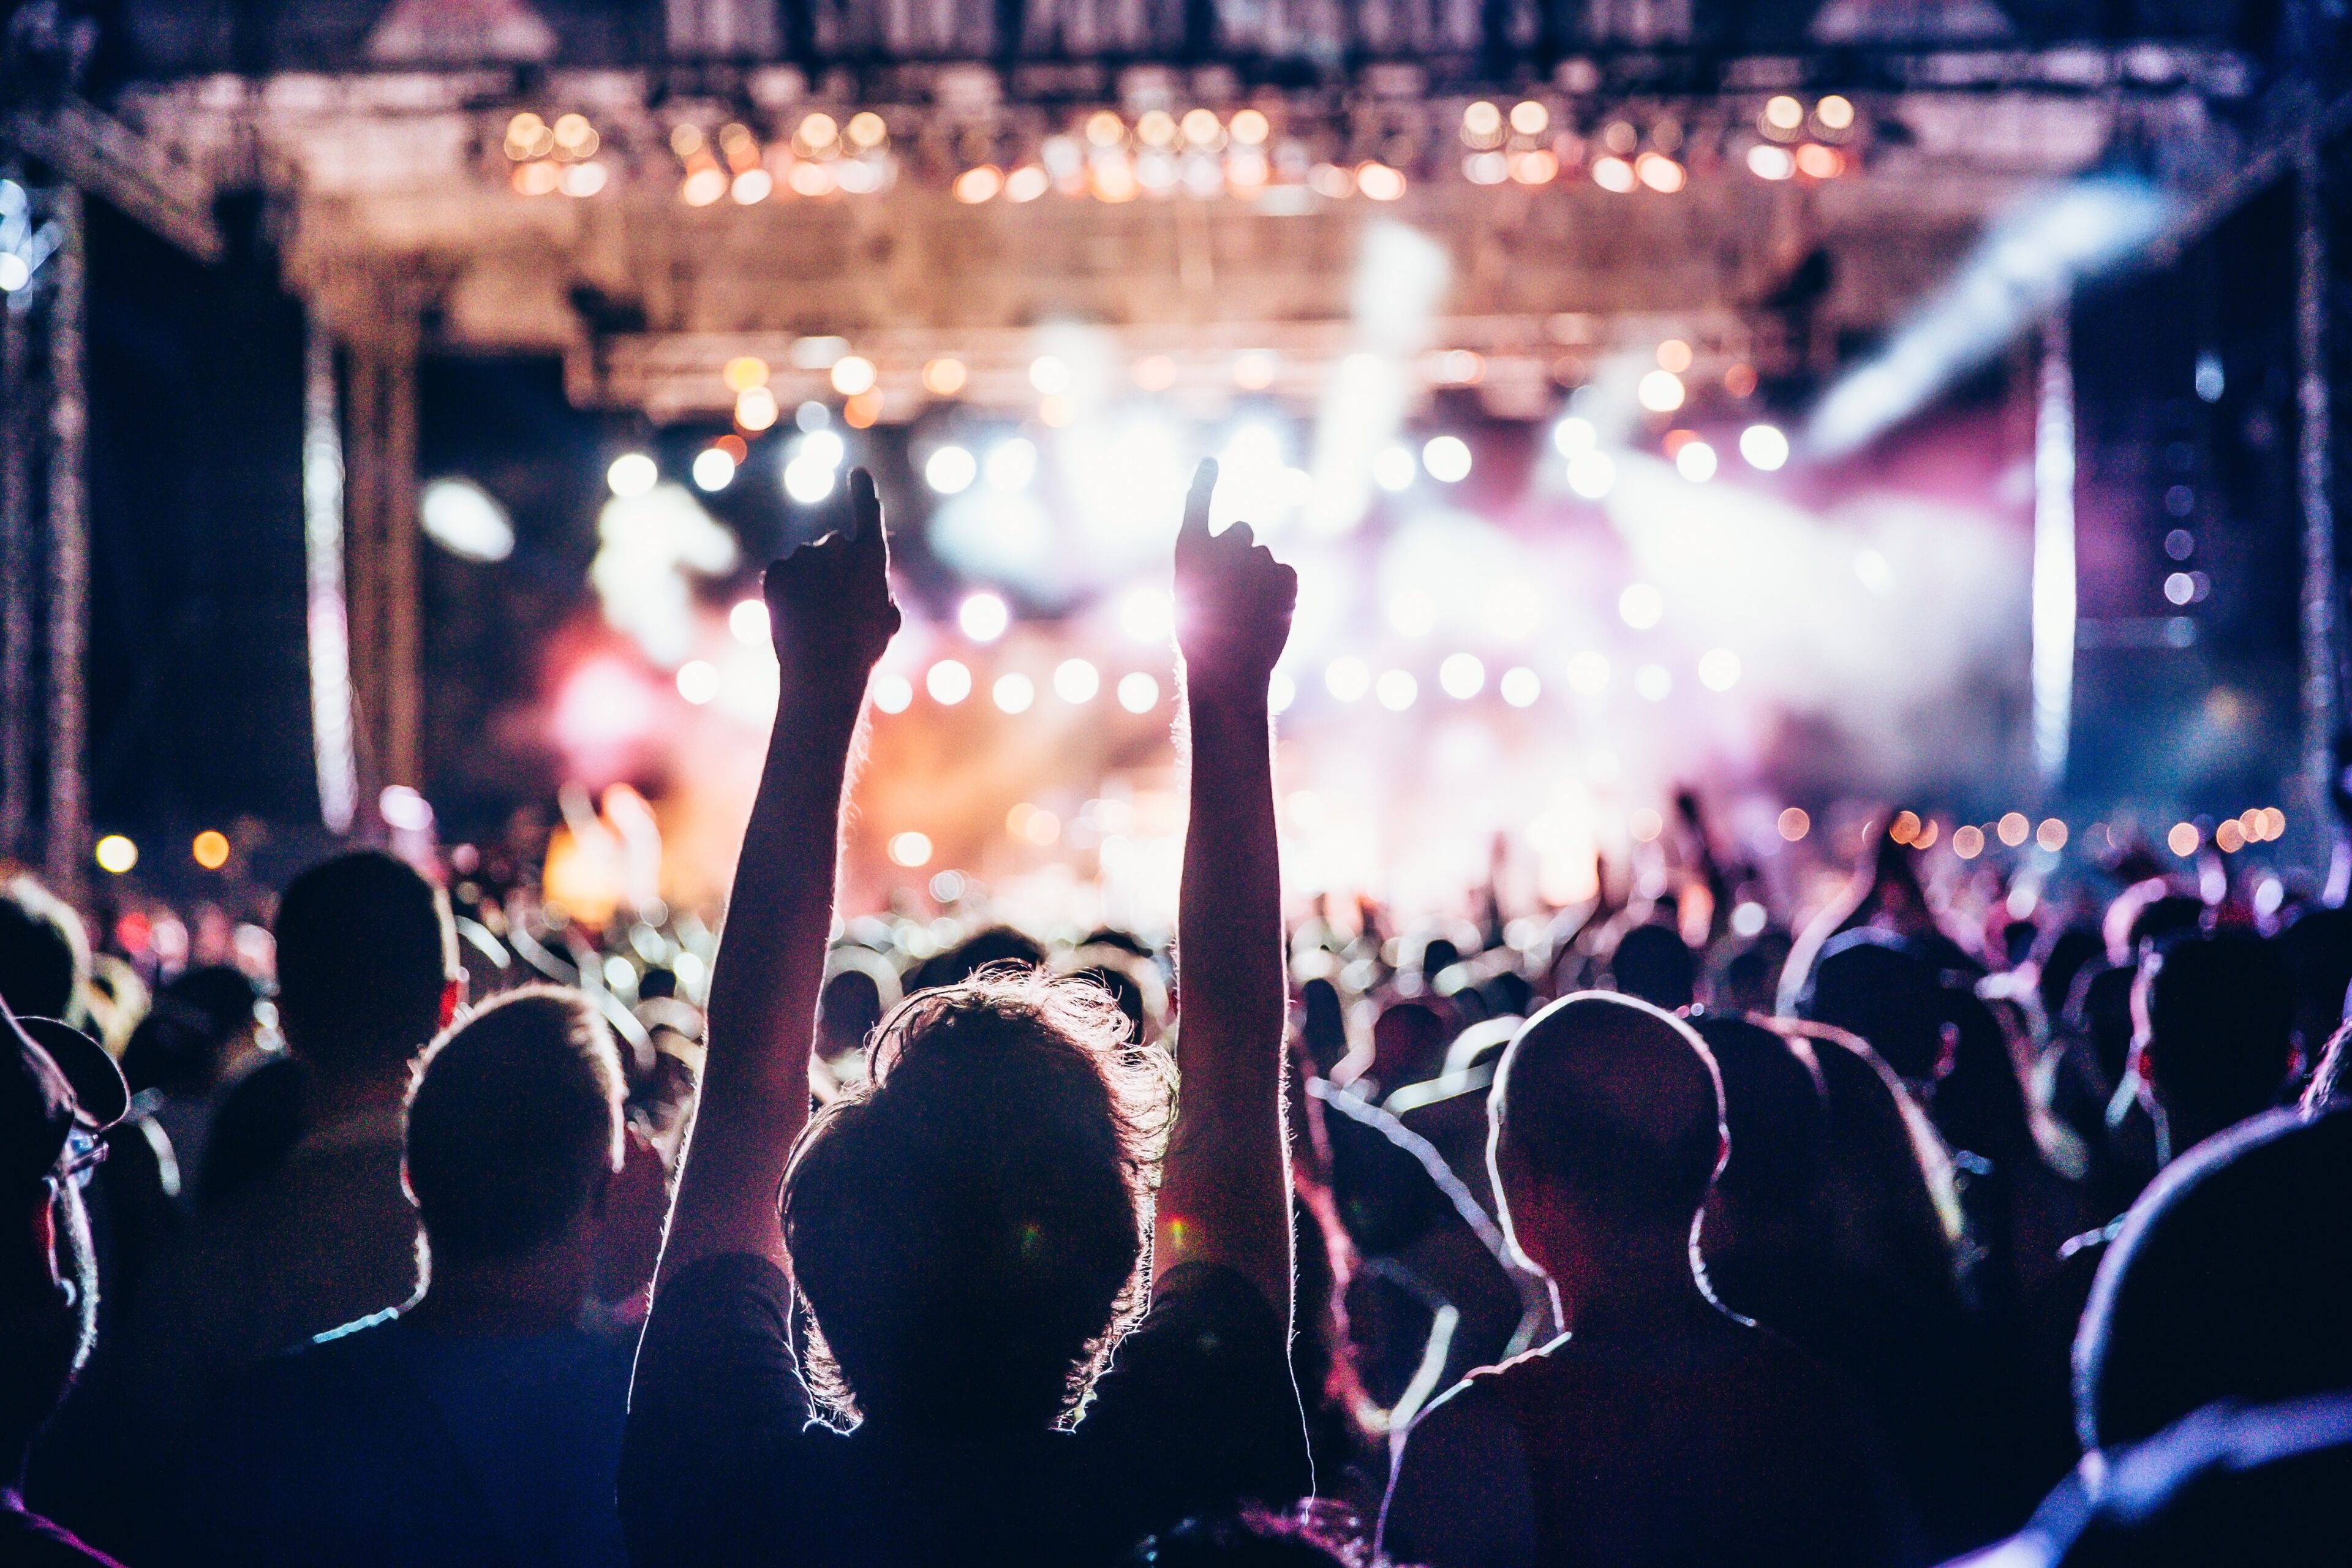 Silhouetted concert-goers raise hands against a vibrant stage lighting at an outdoor music festival at night.